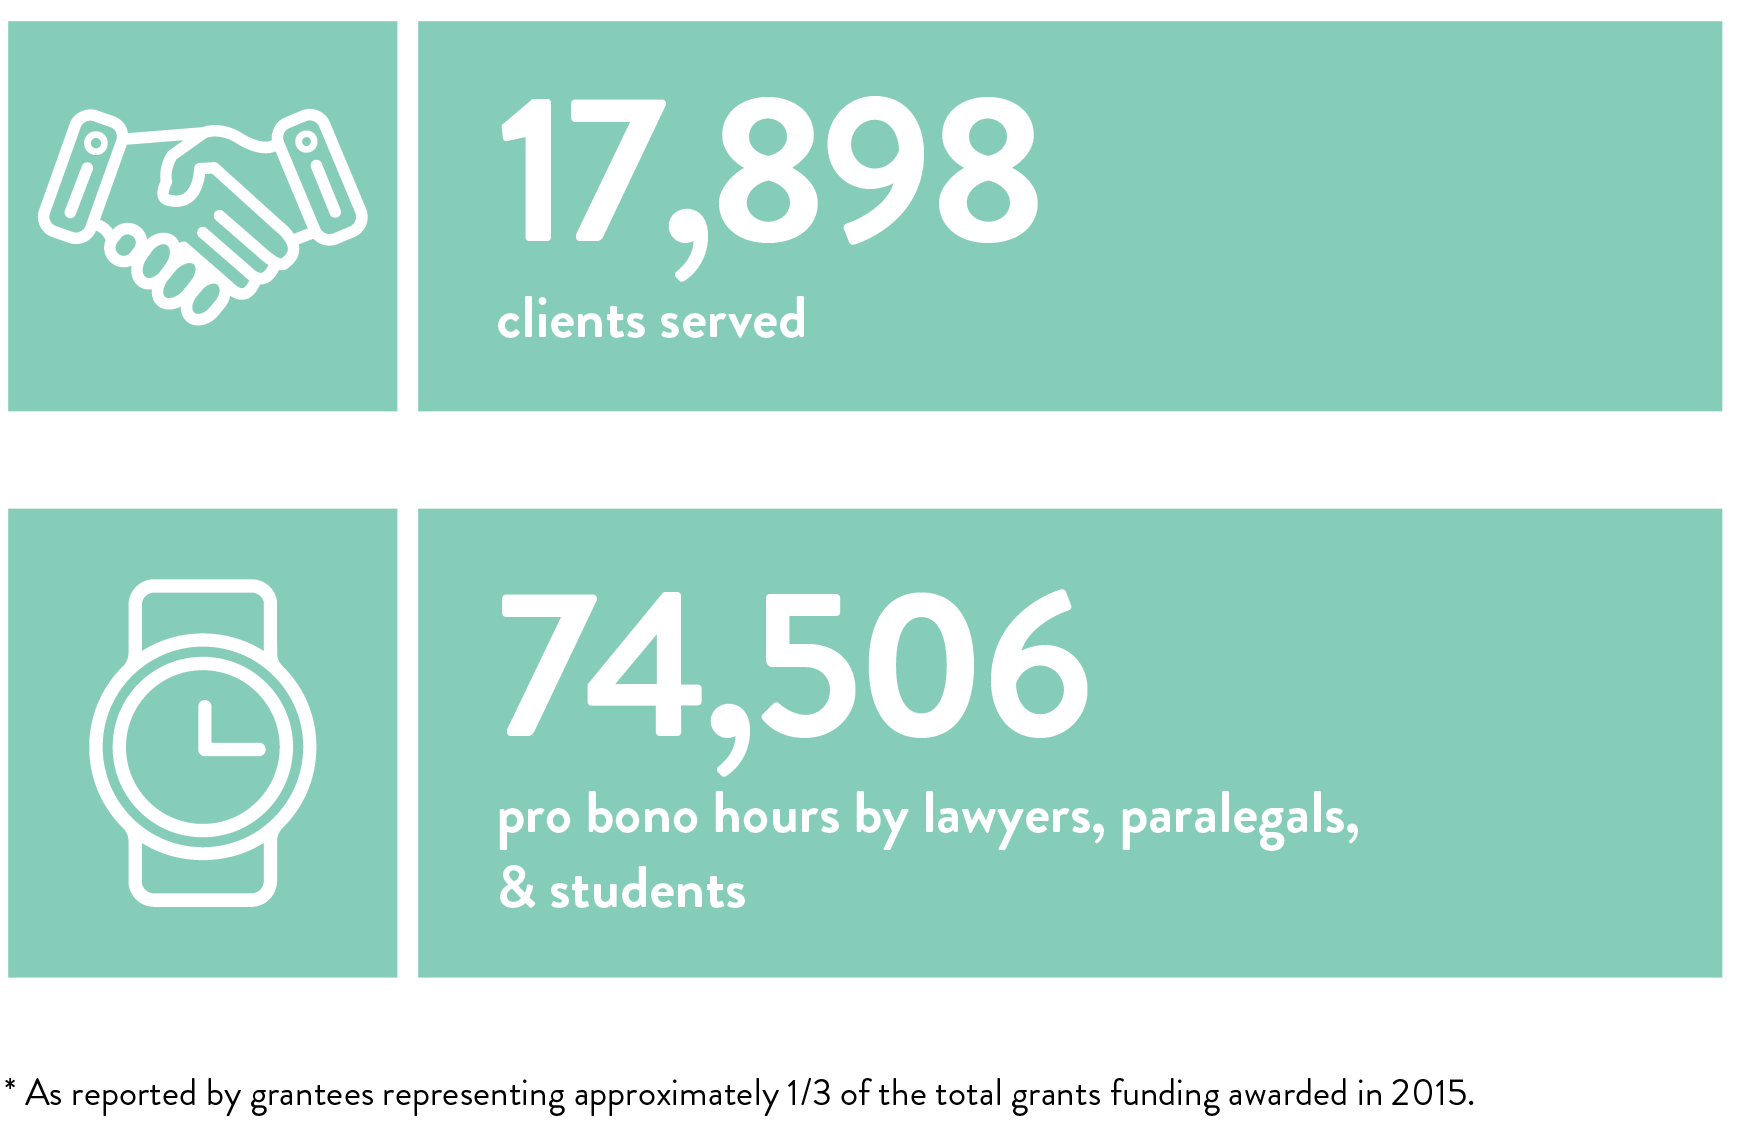 17,898 clients served; 74,506 pro bono hours by lawyers, paralegals, & students